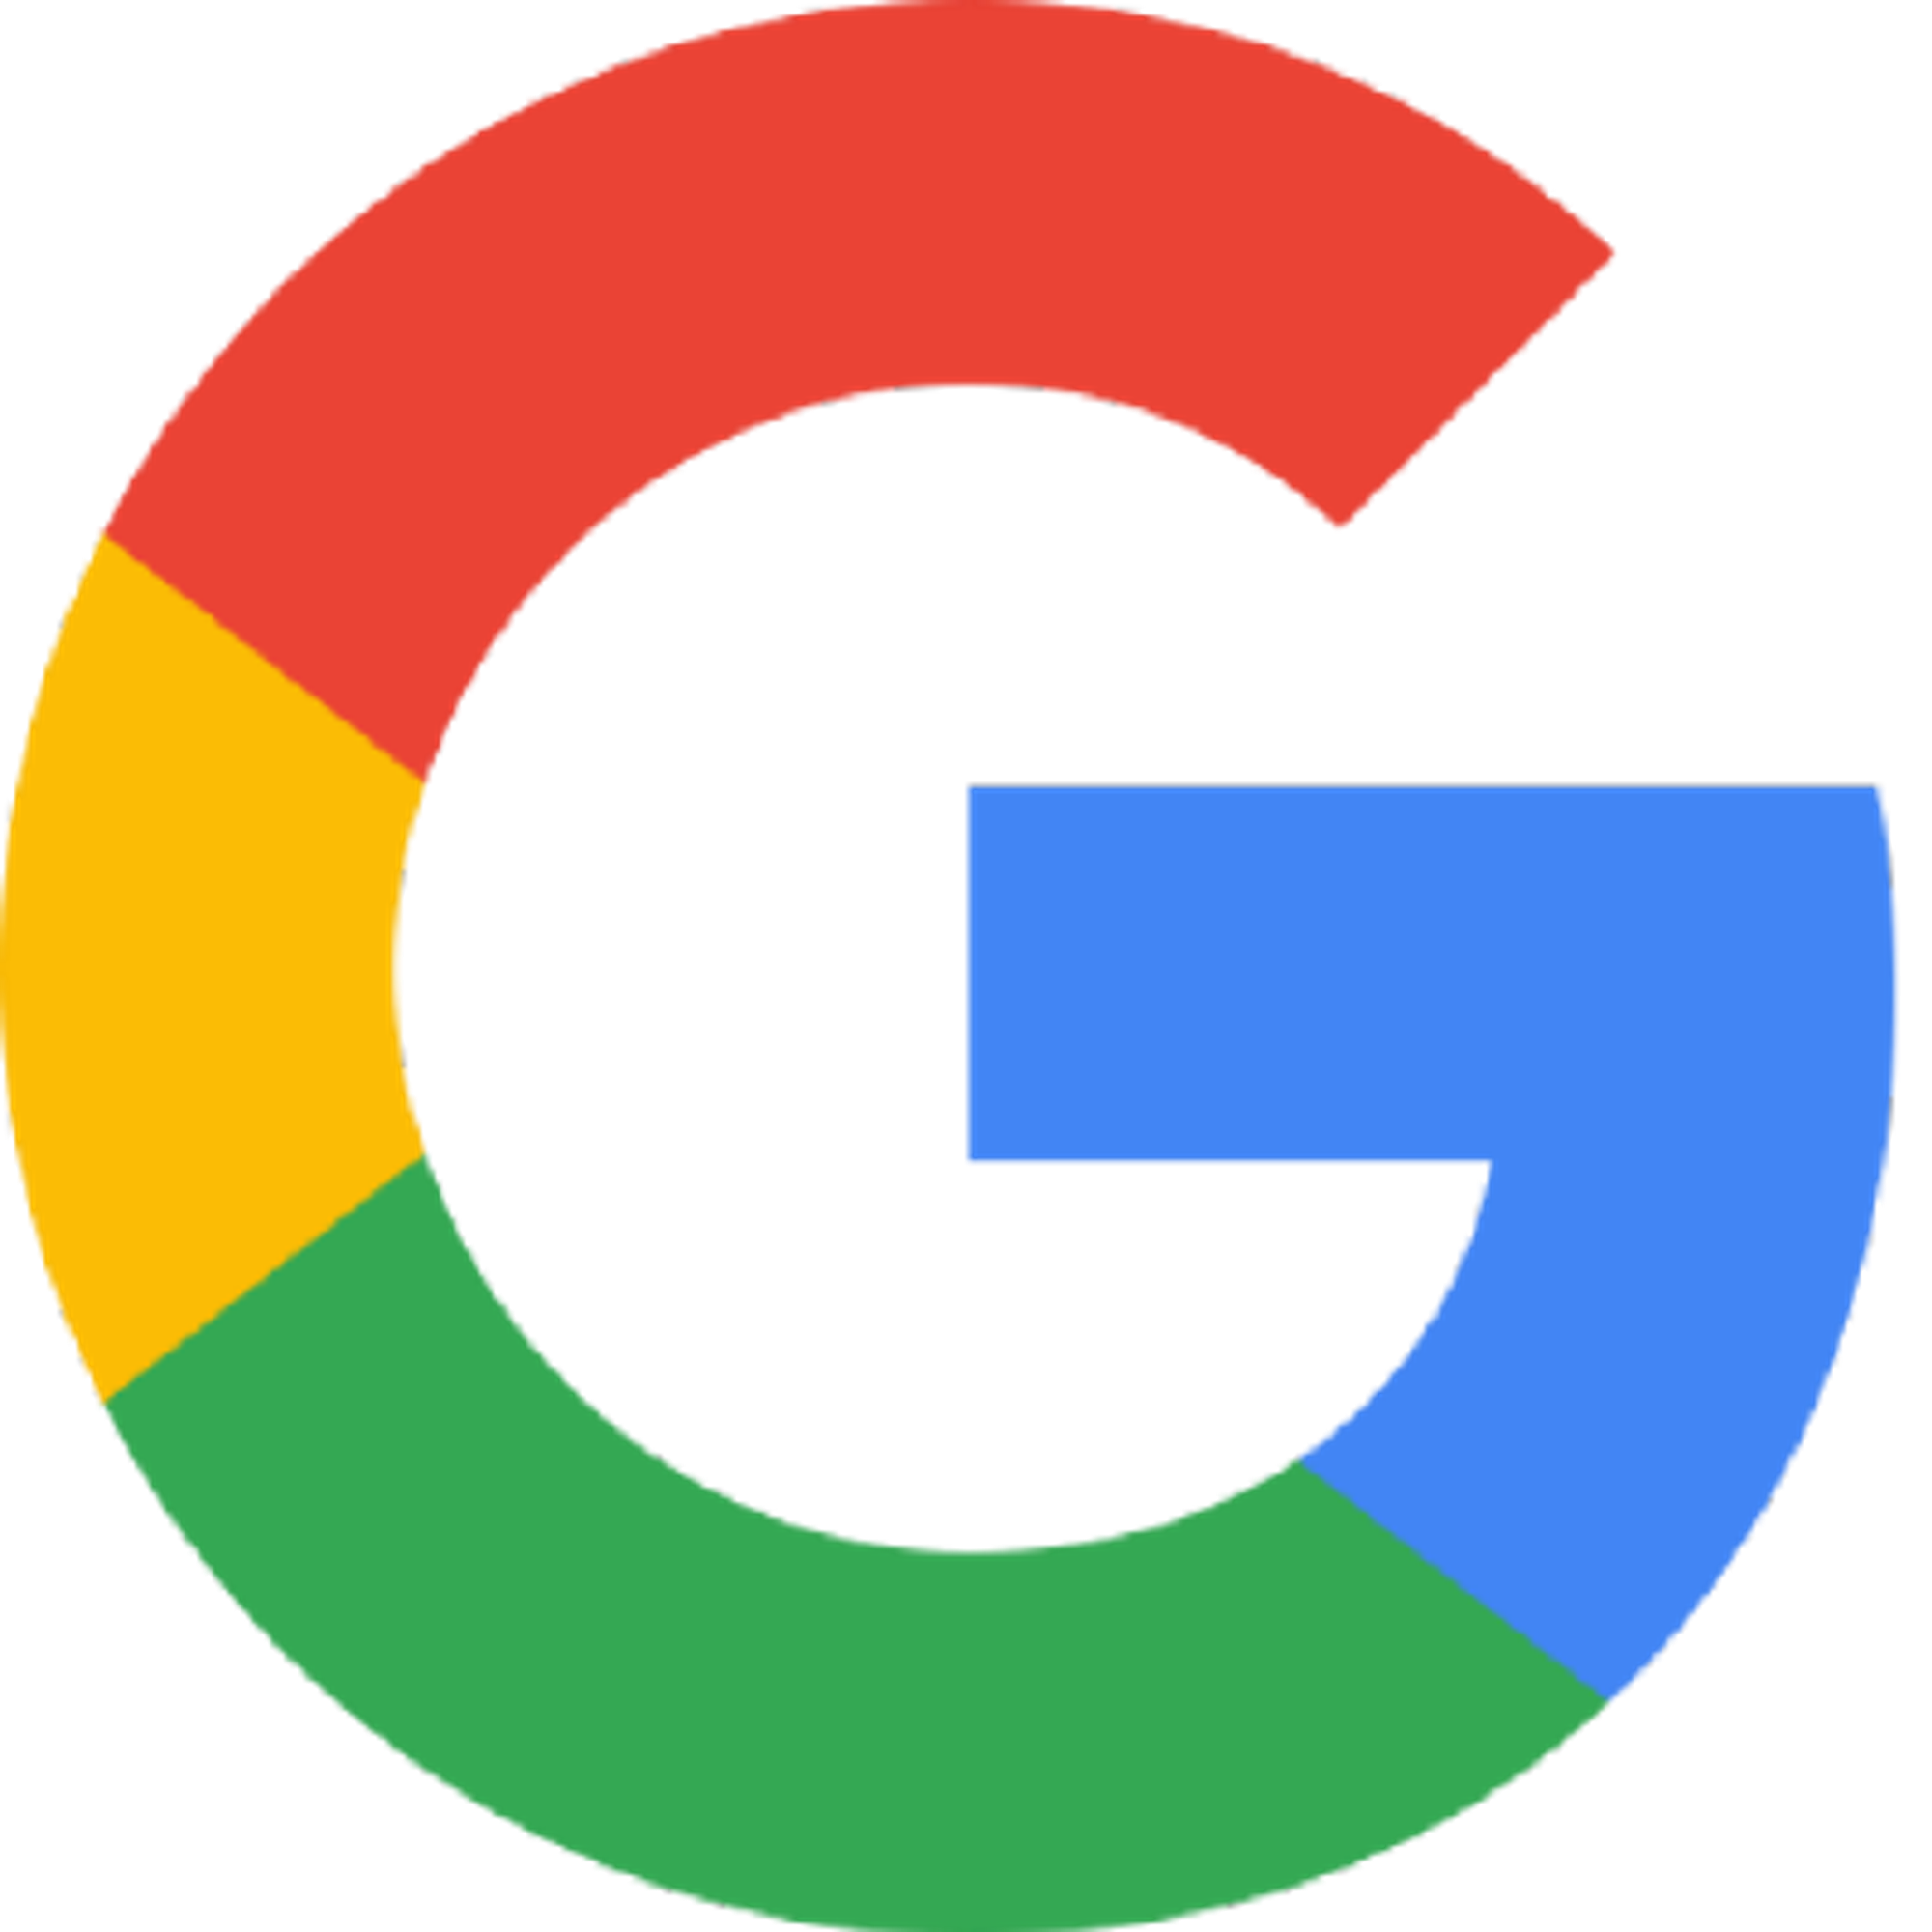 google-research/google-research